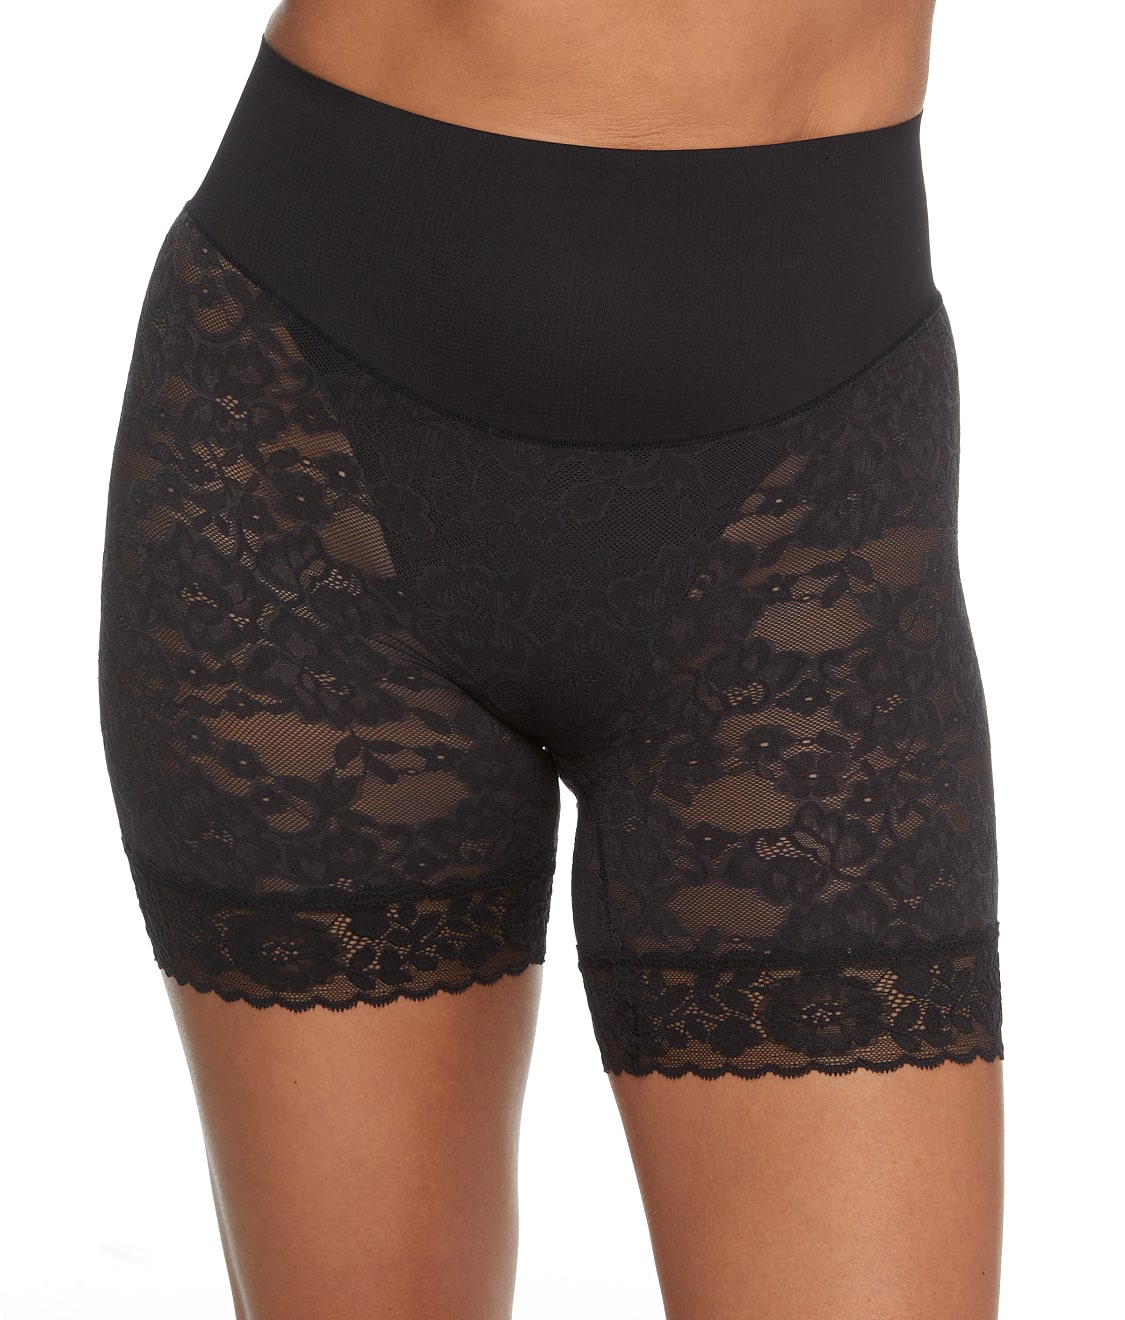 Maidenform: Tame Your Tummy Firm Control Lace Shorty DMS095